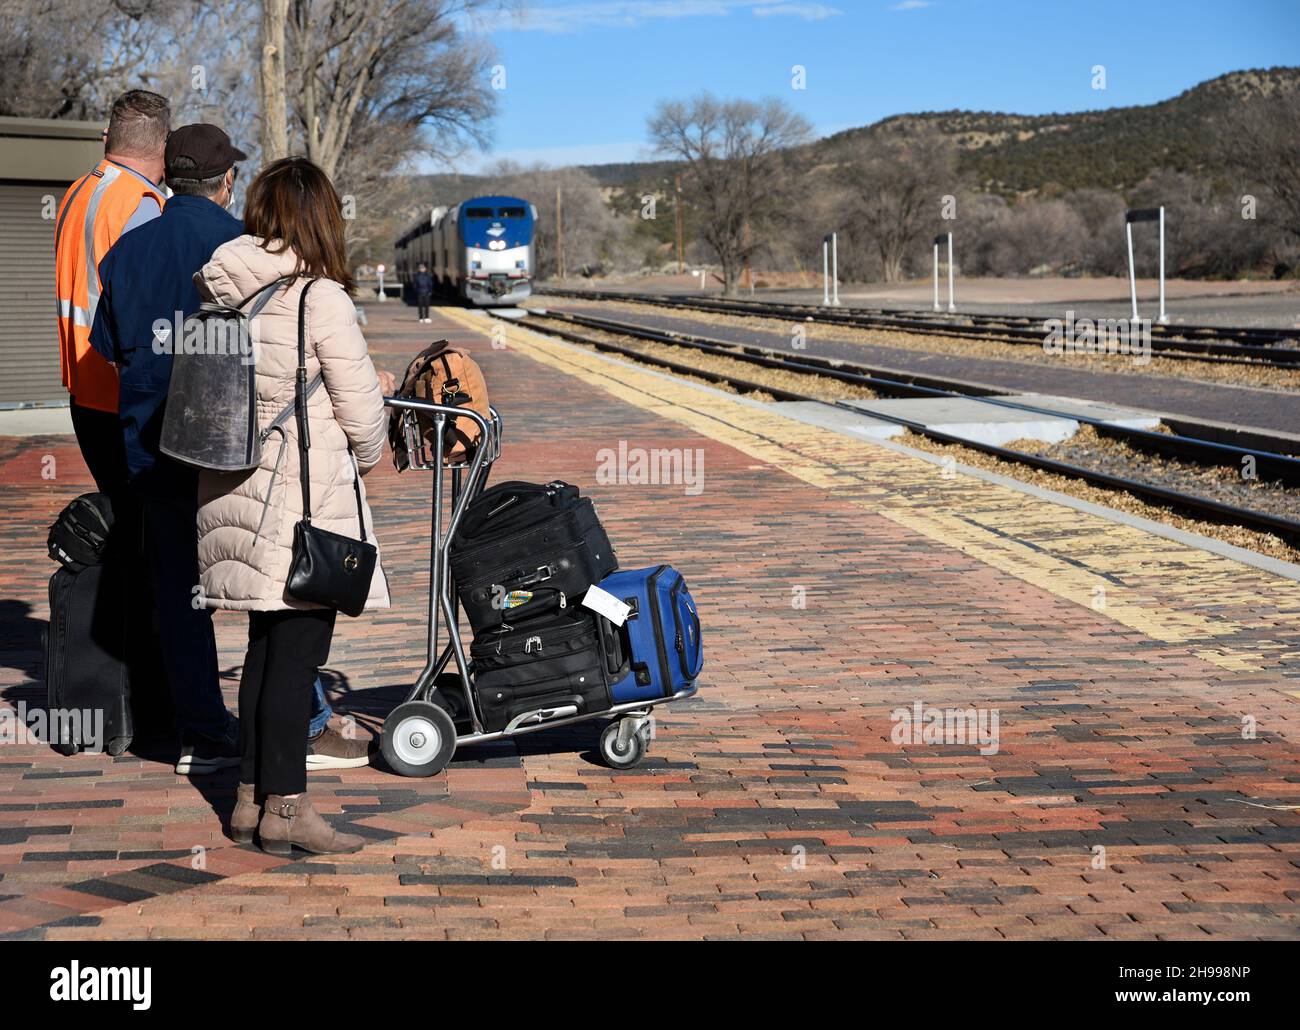 Train passengers at Lamy, New Mexico, prepare to board the Southwest Chief operated by Amtrak which operates between Chicago to Los Angeles. Stock Photo